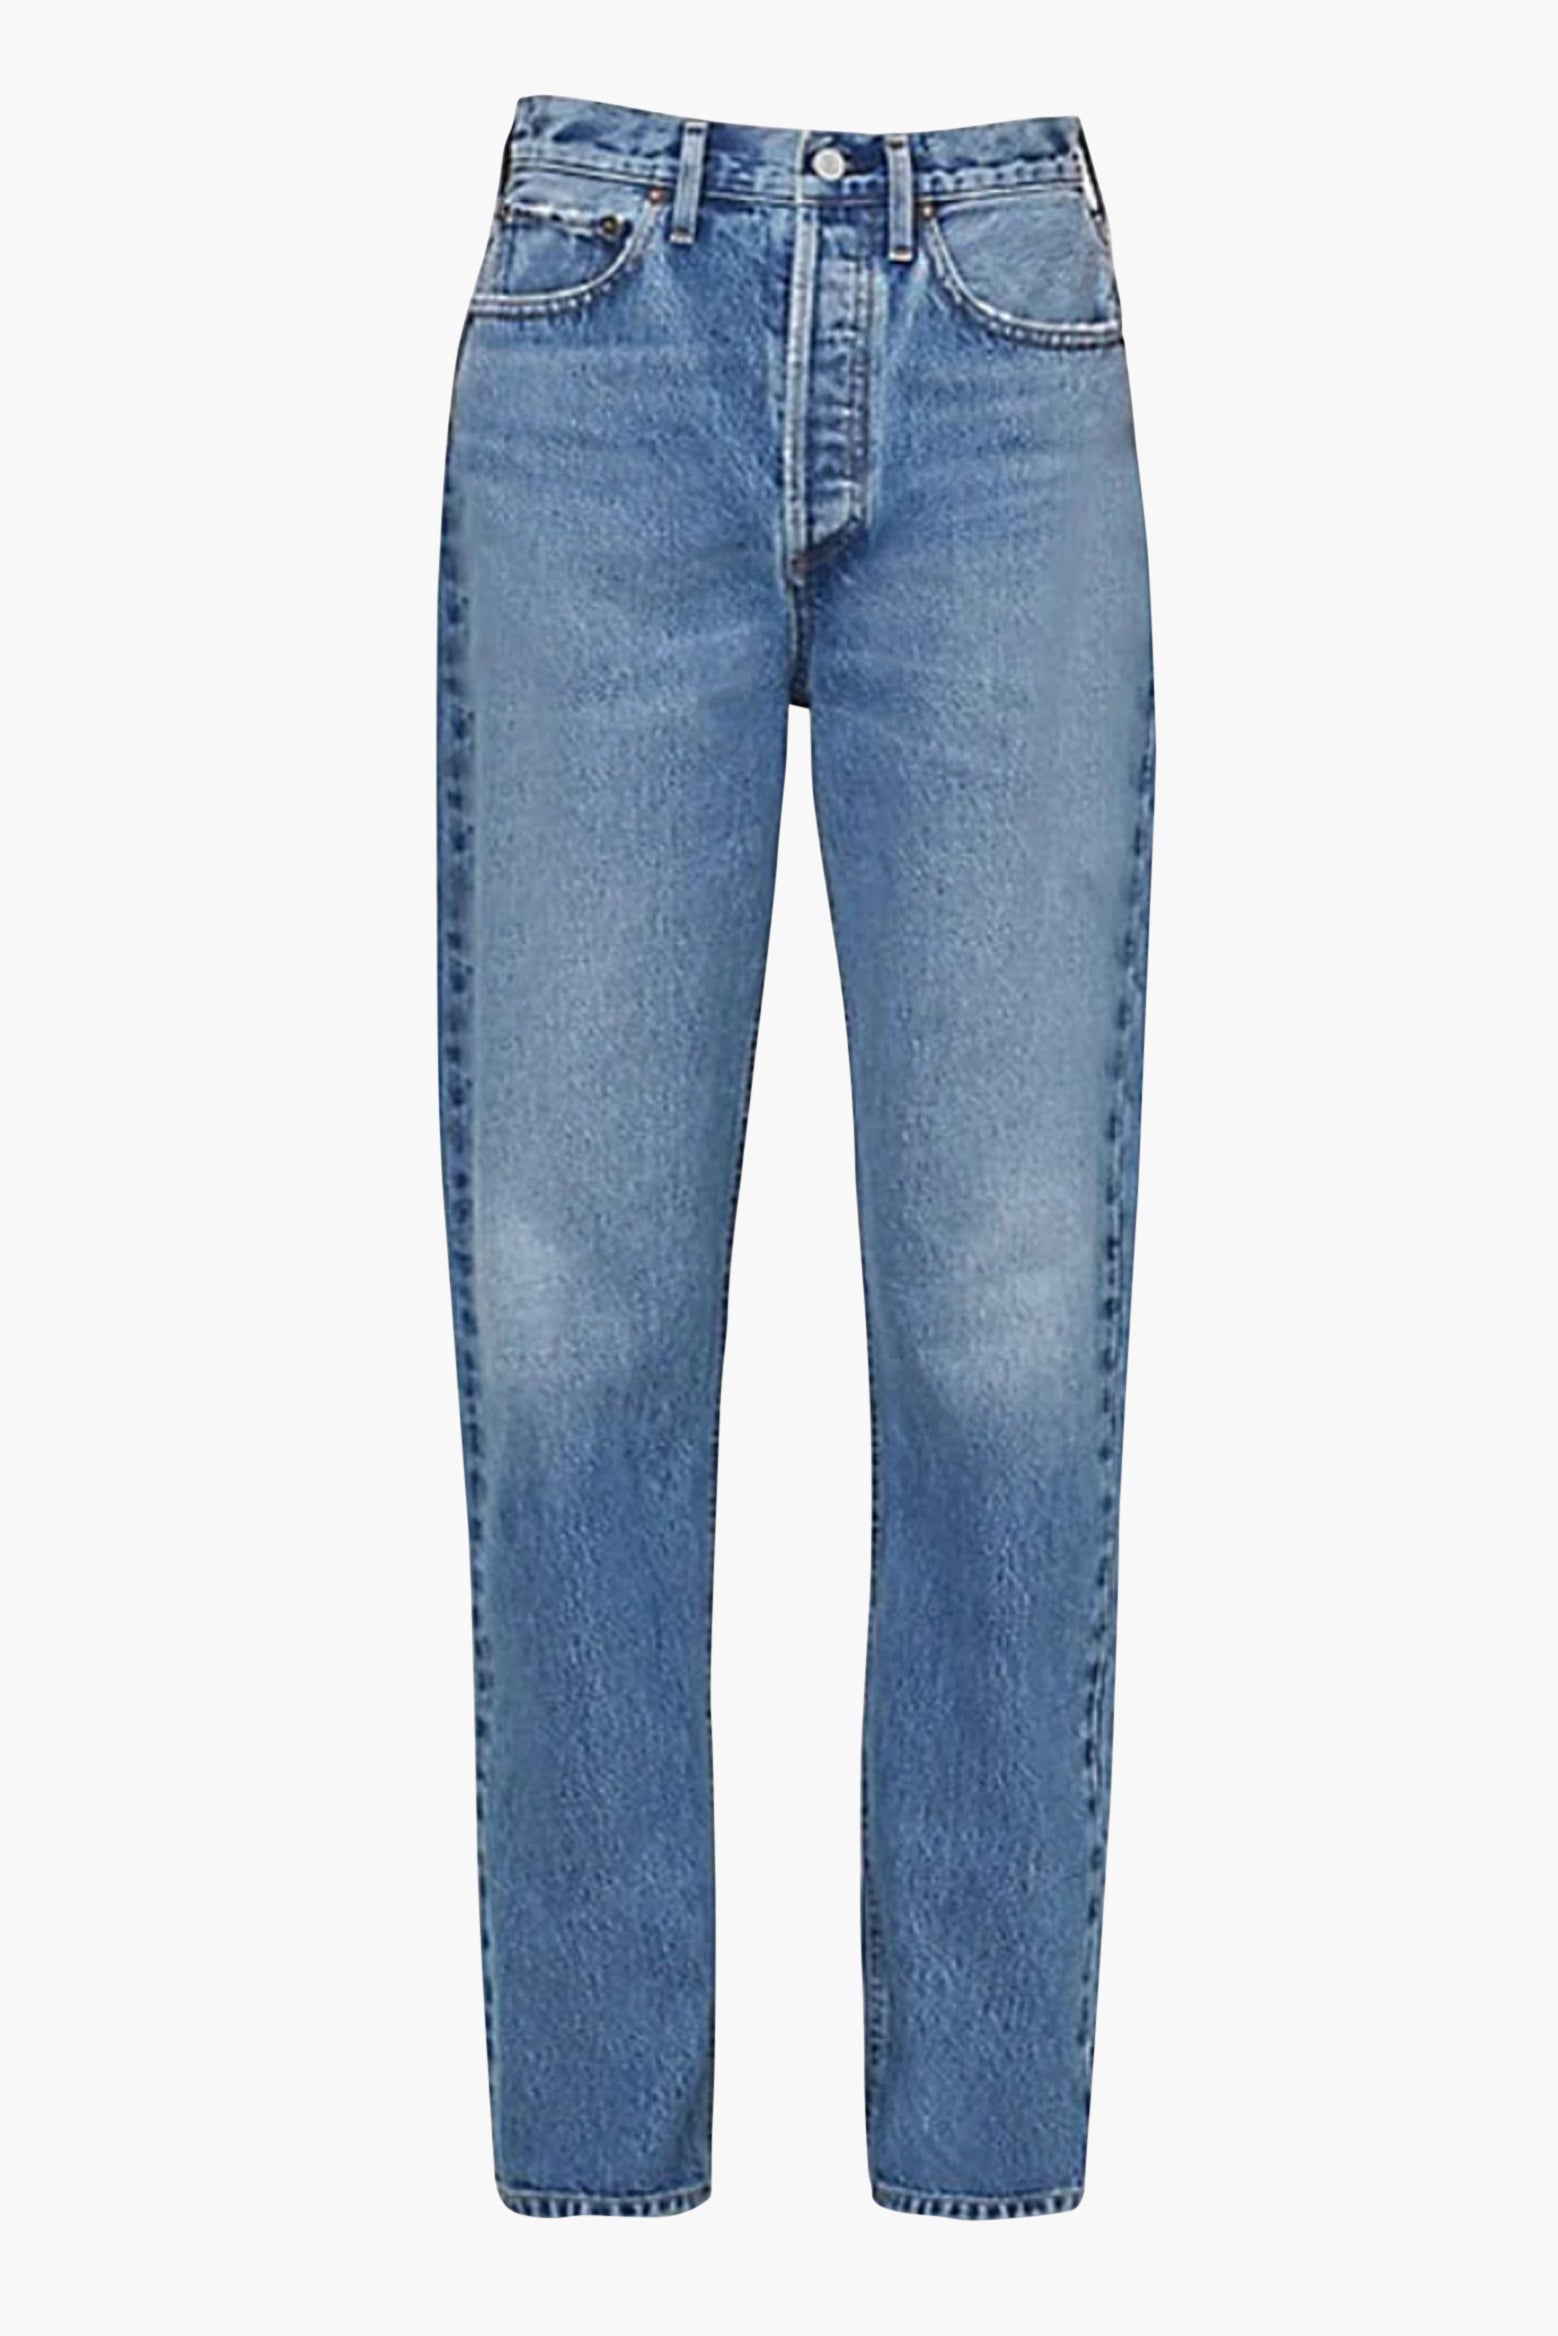 Agolde 90's Pinch Waist Jeans in Navigate from The New Trend